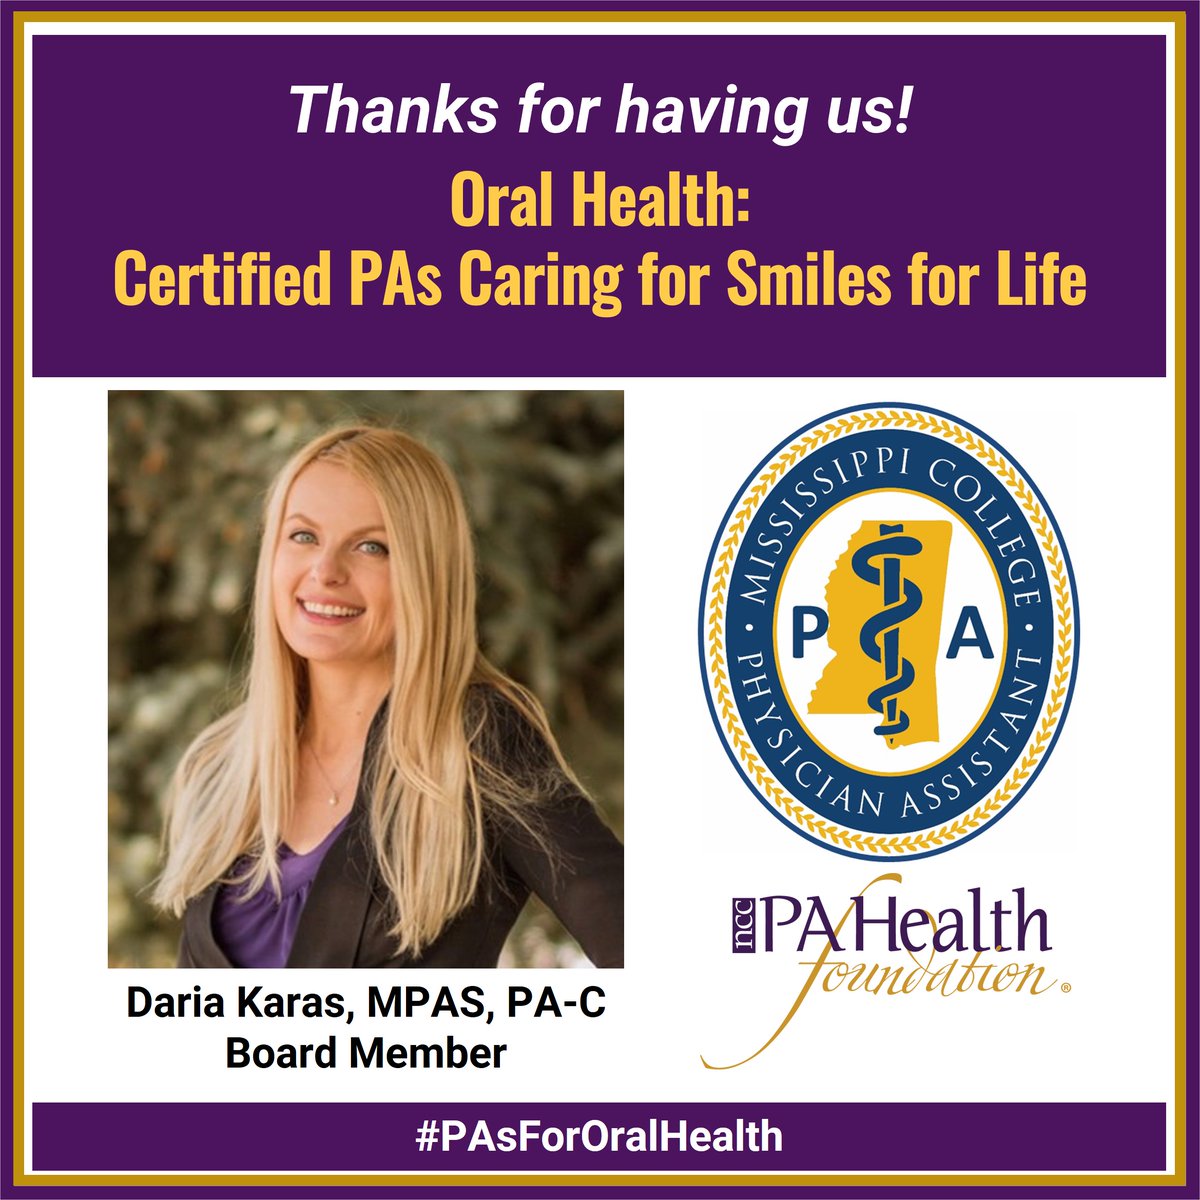 Thanks to the @MissCollege PA program for having us to share what #CertifiedPAs can do to address #OralHealth. If you’re interested in a presentation, email us at ContactUs@nccPAHealthFoundation.net. 
#PAsDoThat #PAStudent #PAeducator #PAsforOralHealth #OralHealthIsHealth